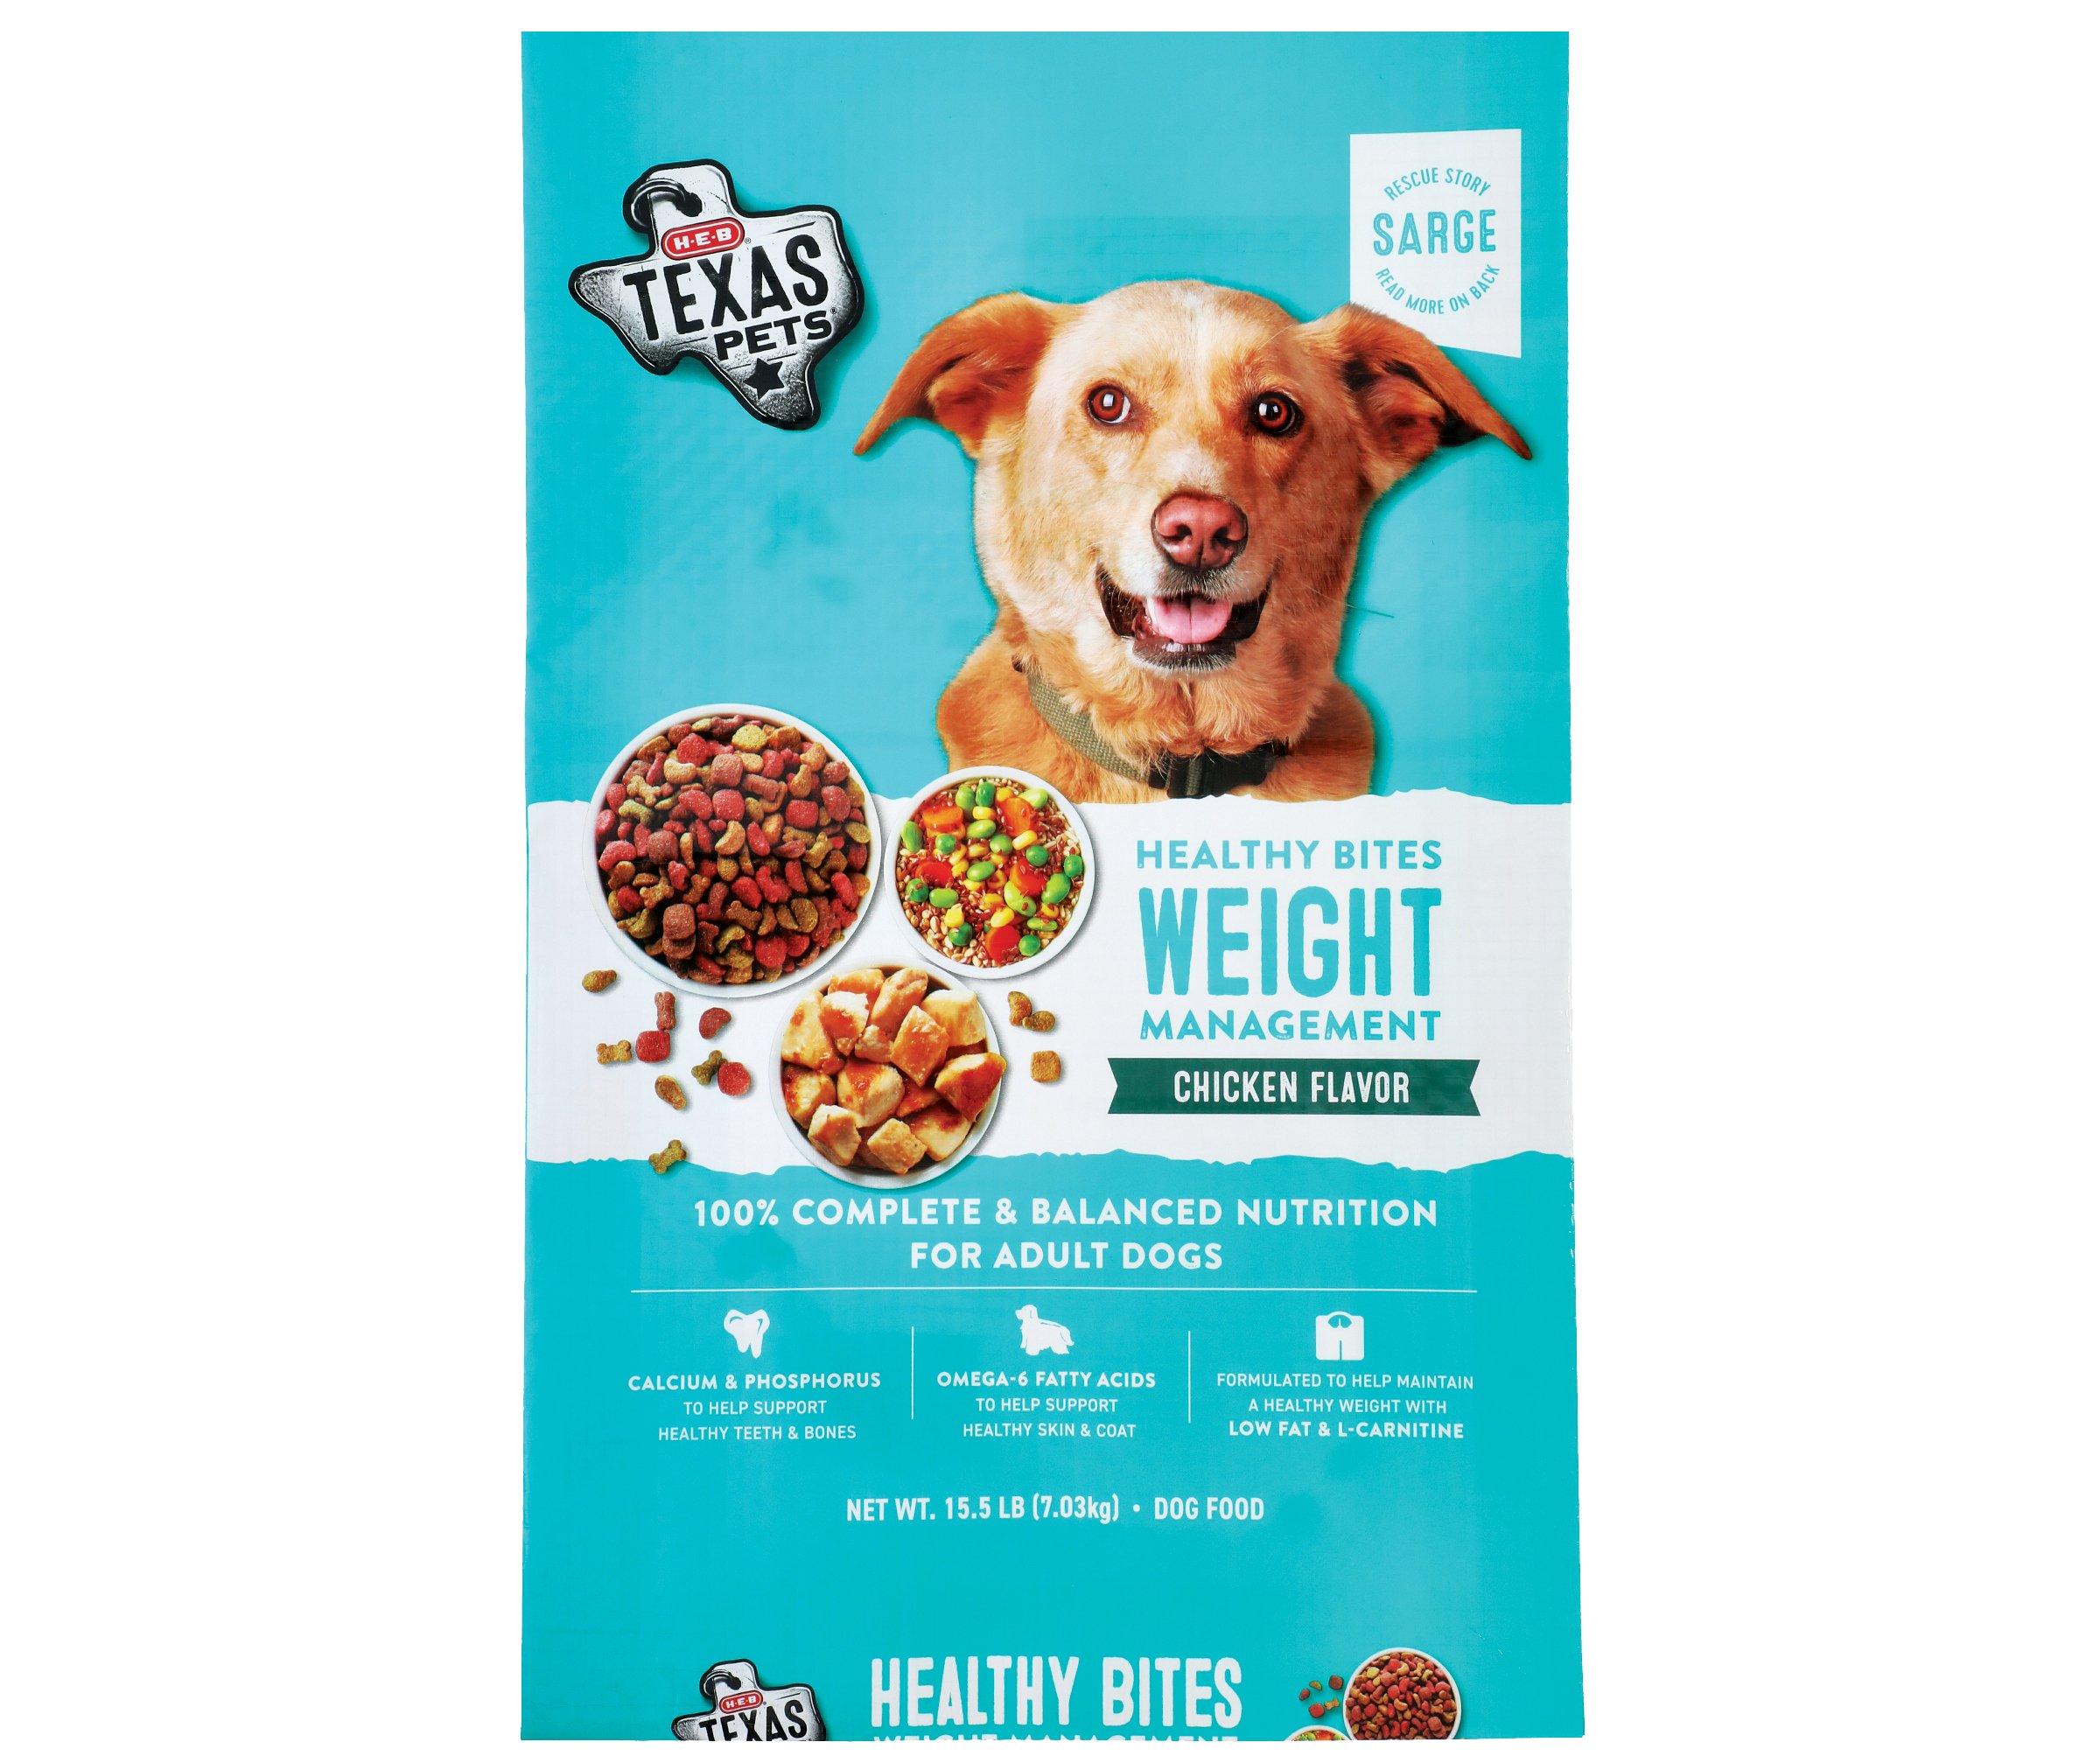 HEB Texas Pets Healthy Bites Weight Management Dry Dog Food Shop